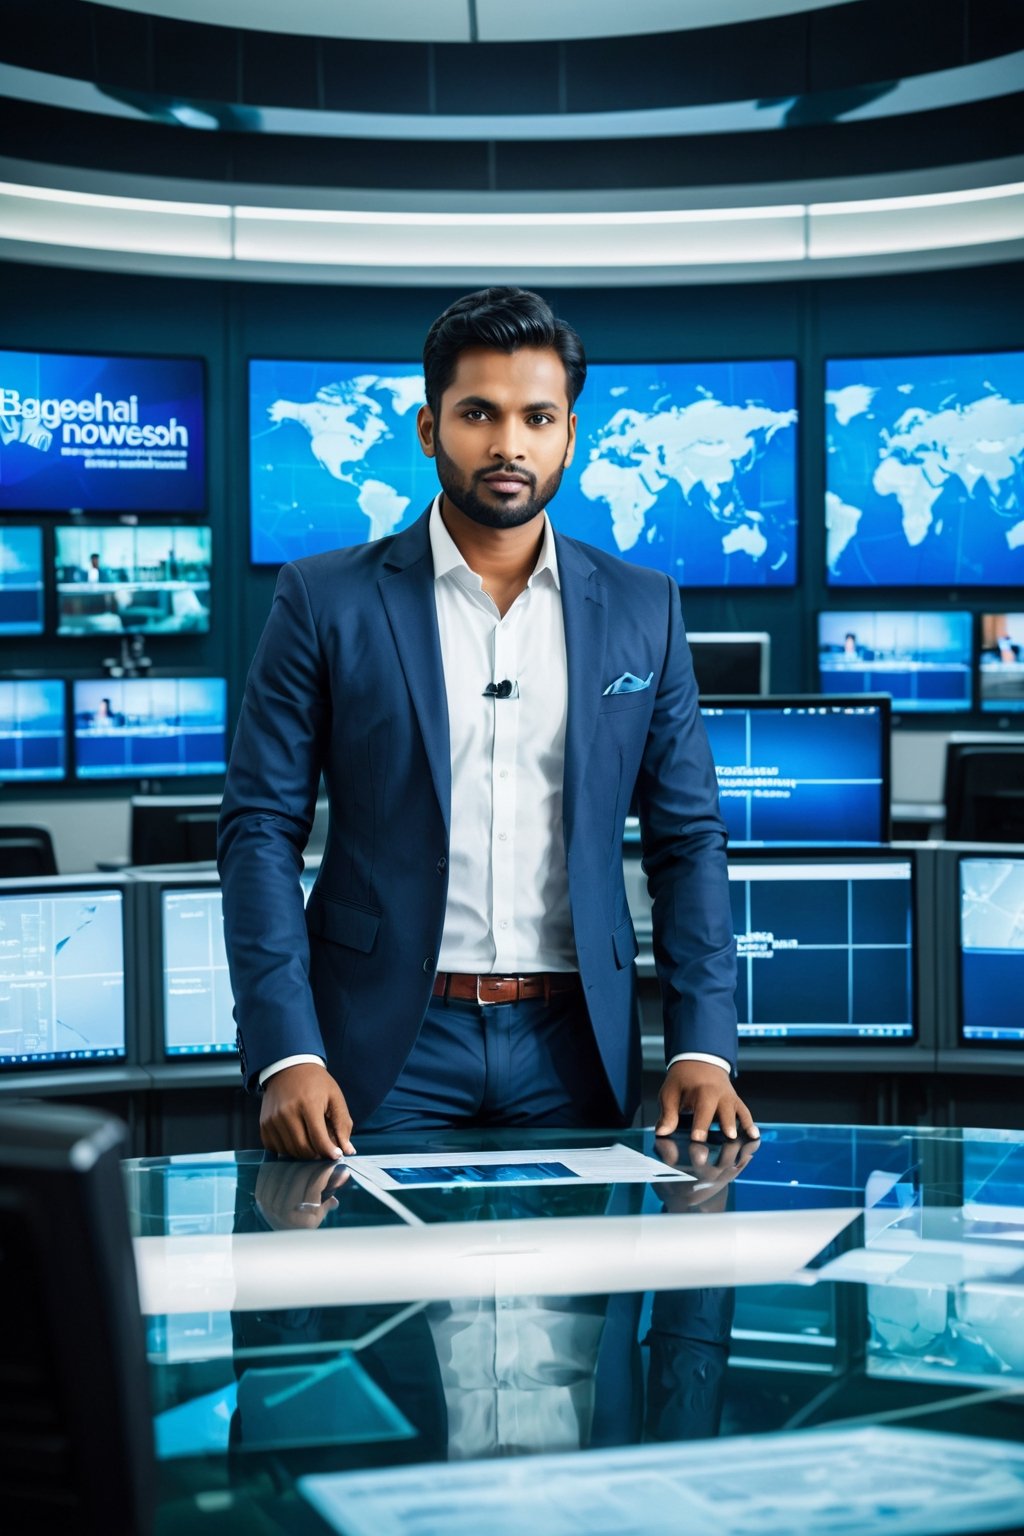 "Create a visually engaging image depicting  young male news presenters in an newsroom setting and he is looking at the  in his front camera. The scene should capture the essence of professionalism, diversity, and collaboration. presenter should be dressed in appropriate attire for a news broadcast, and the background should feature elements suggestive of a modern newsroom environment. Ensure that the image reflects cultural sensitivity and authenticity, highlighting the cultural of  Bangladesh."